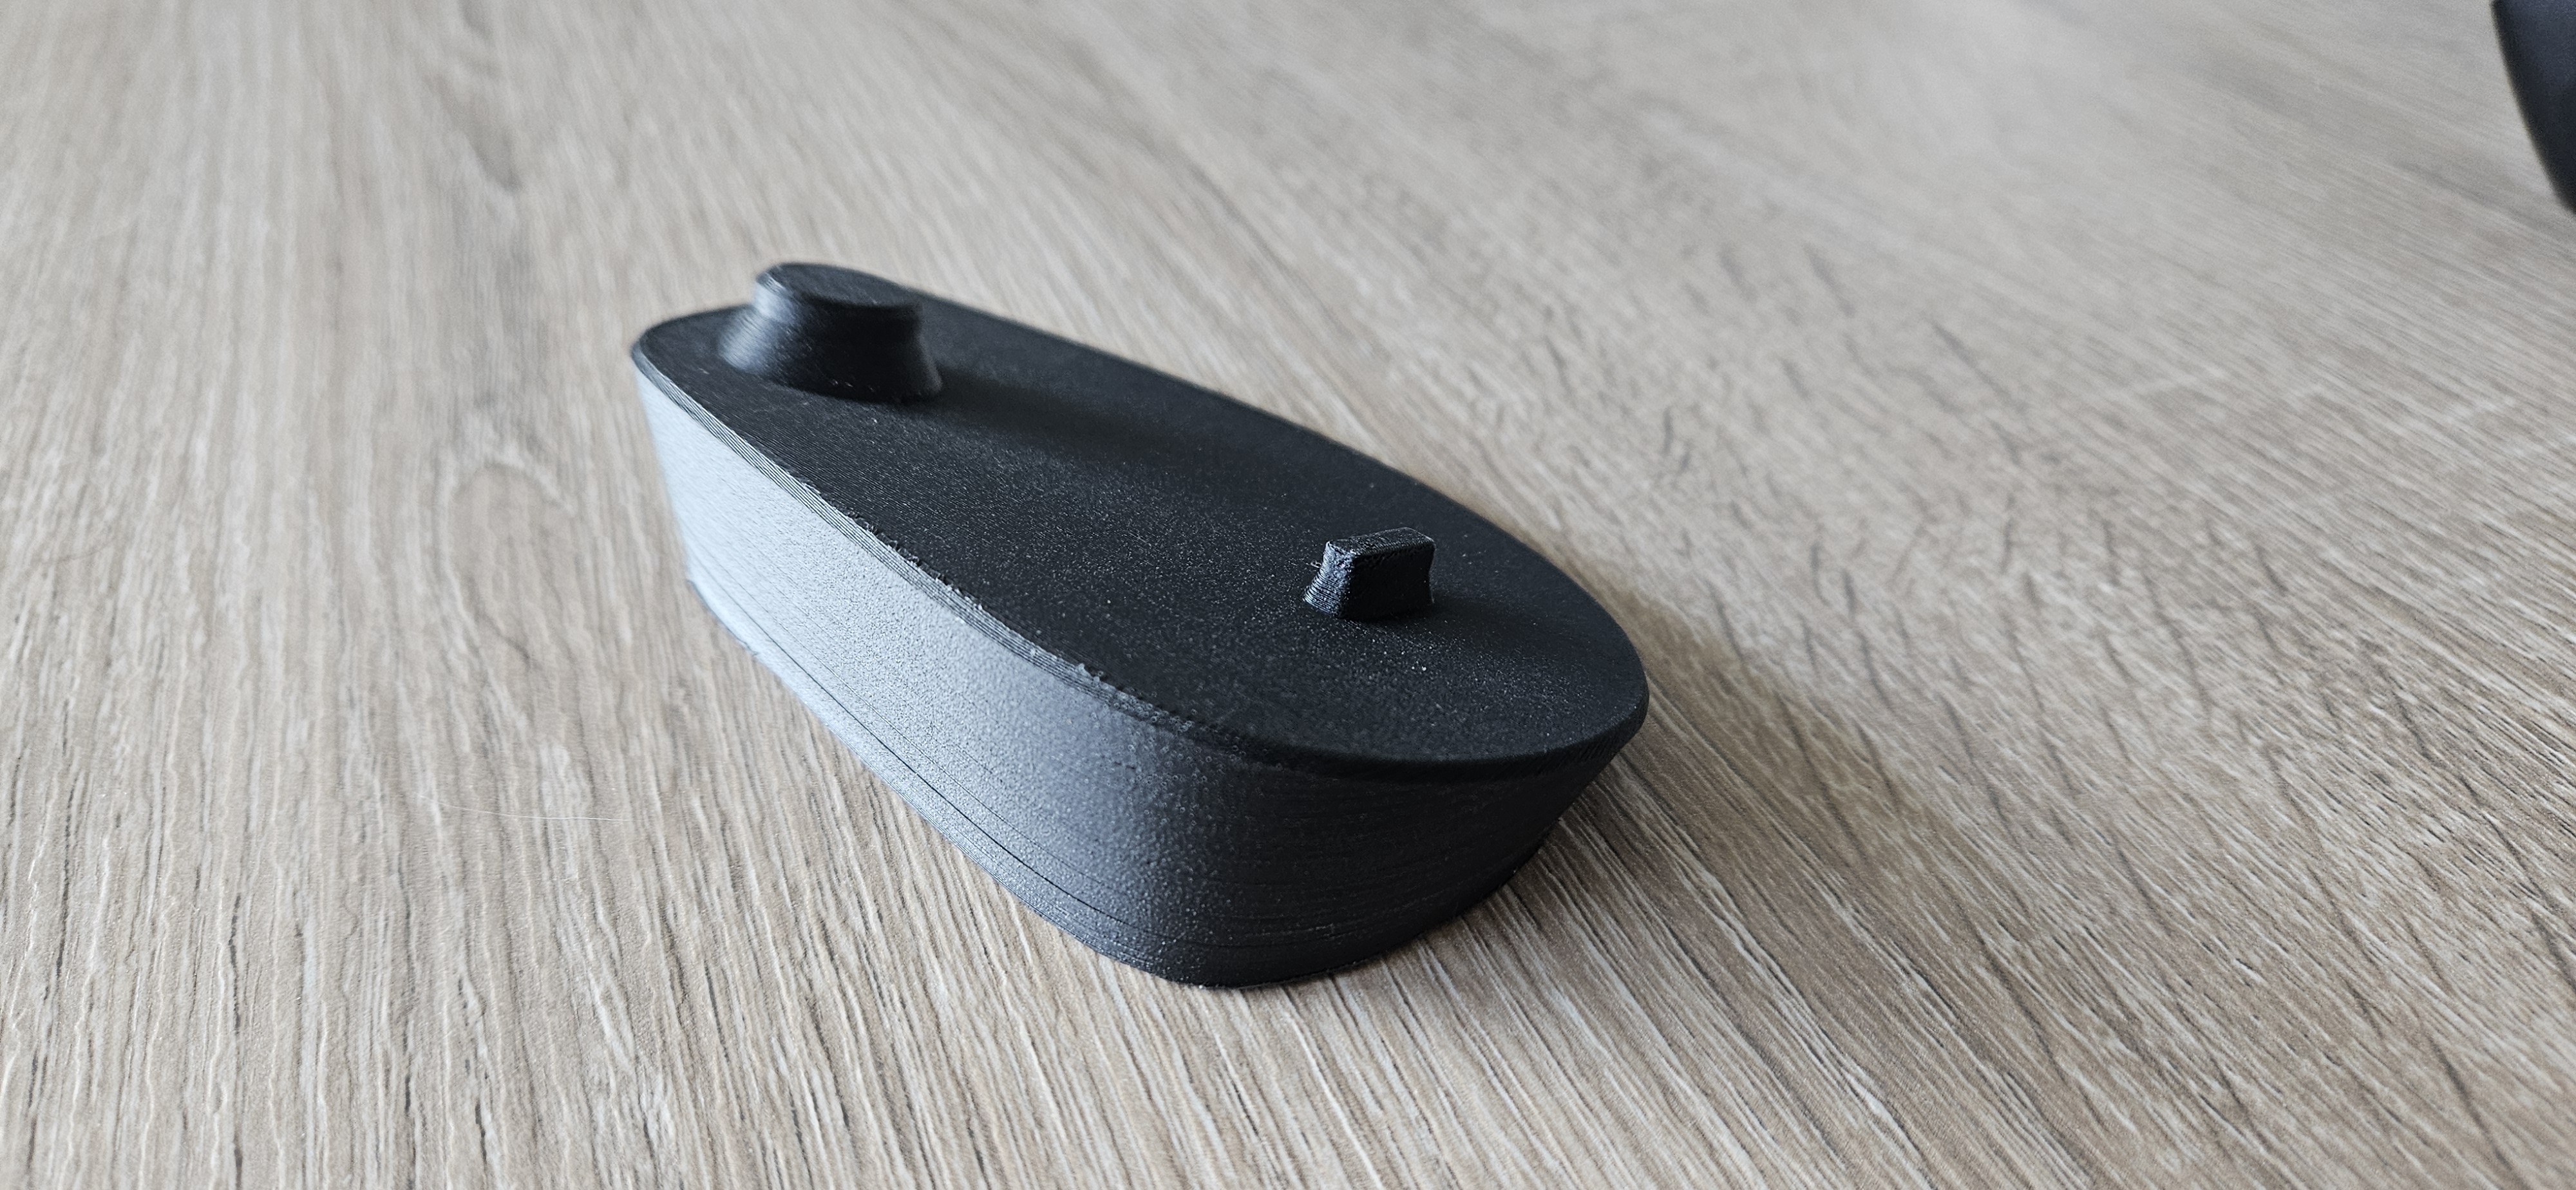 3D printed support for the Deft Pro